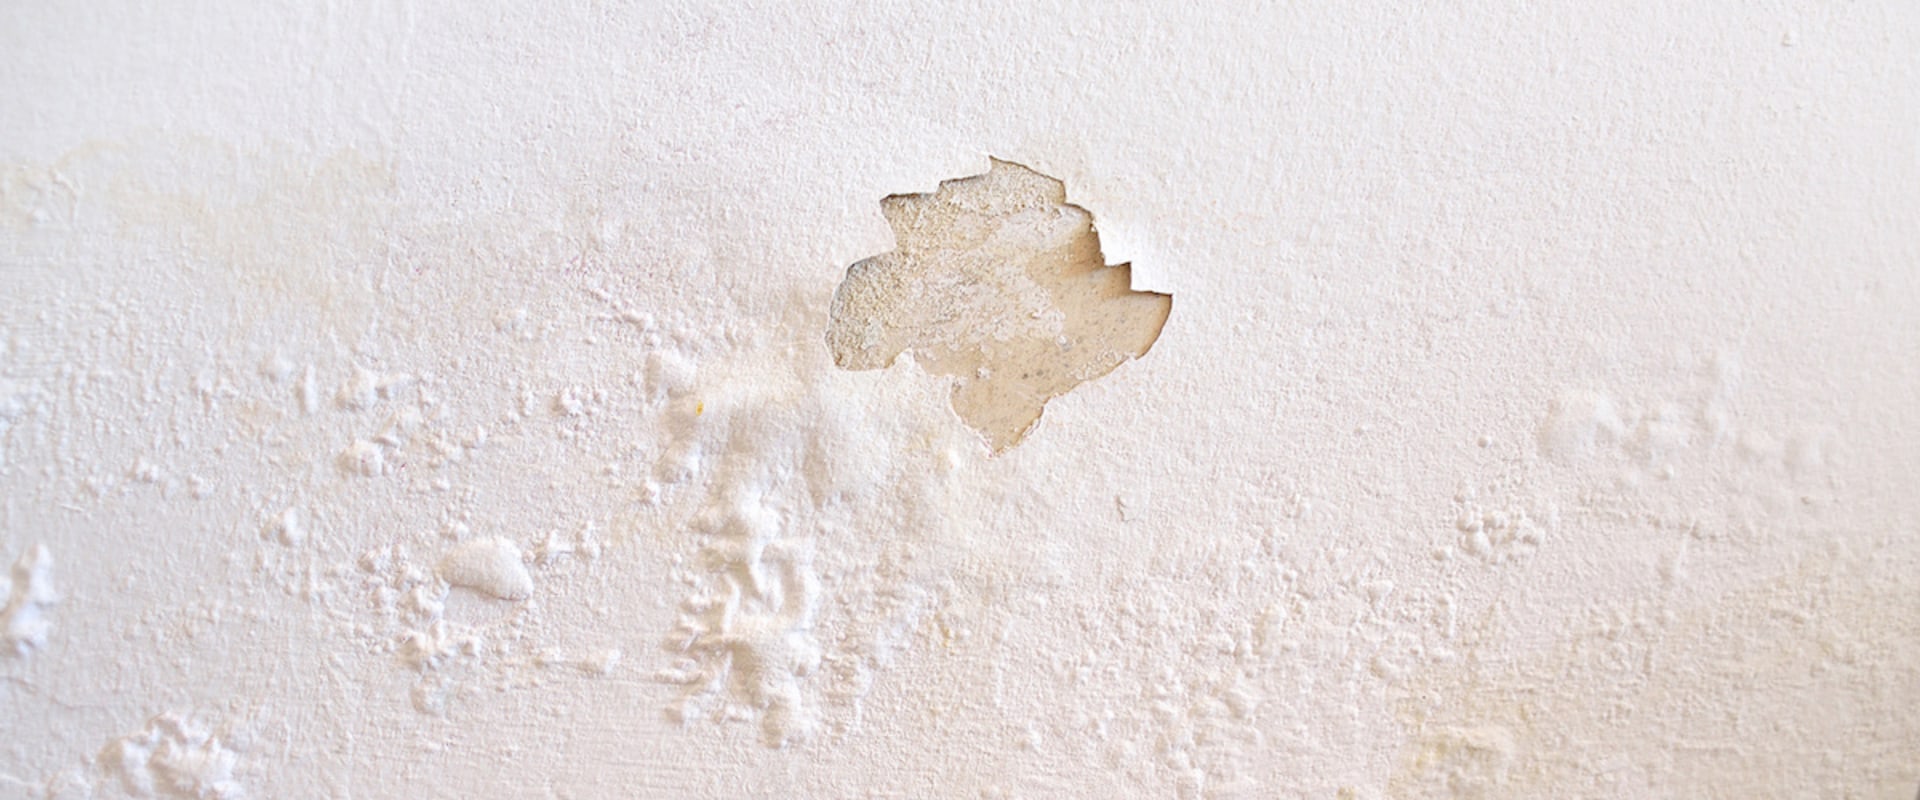 How to Dry Out Water Damaged Walls: 10 Easy Steps